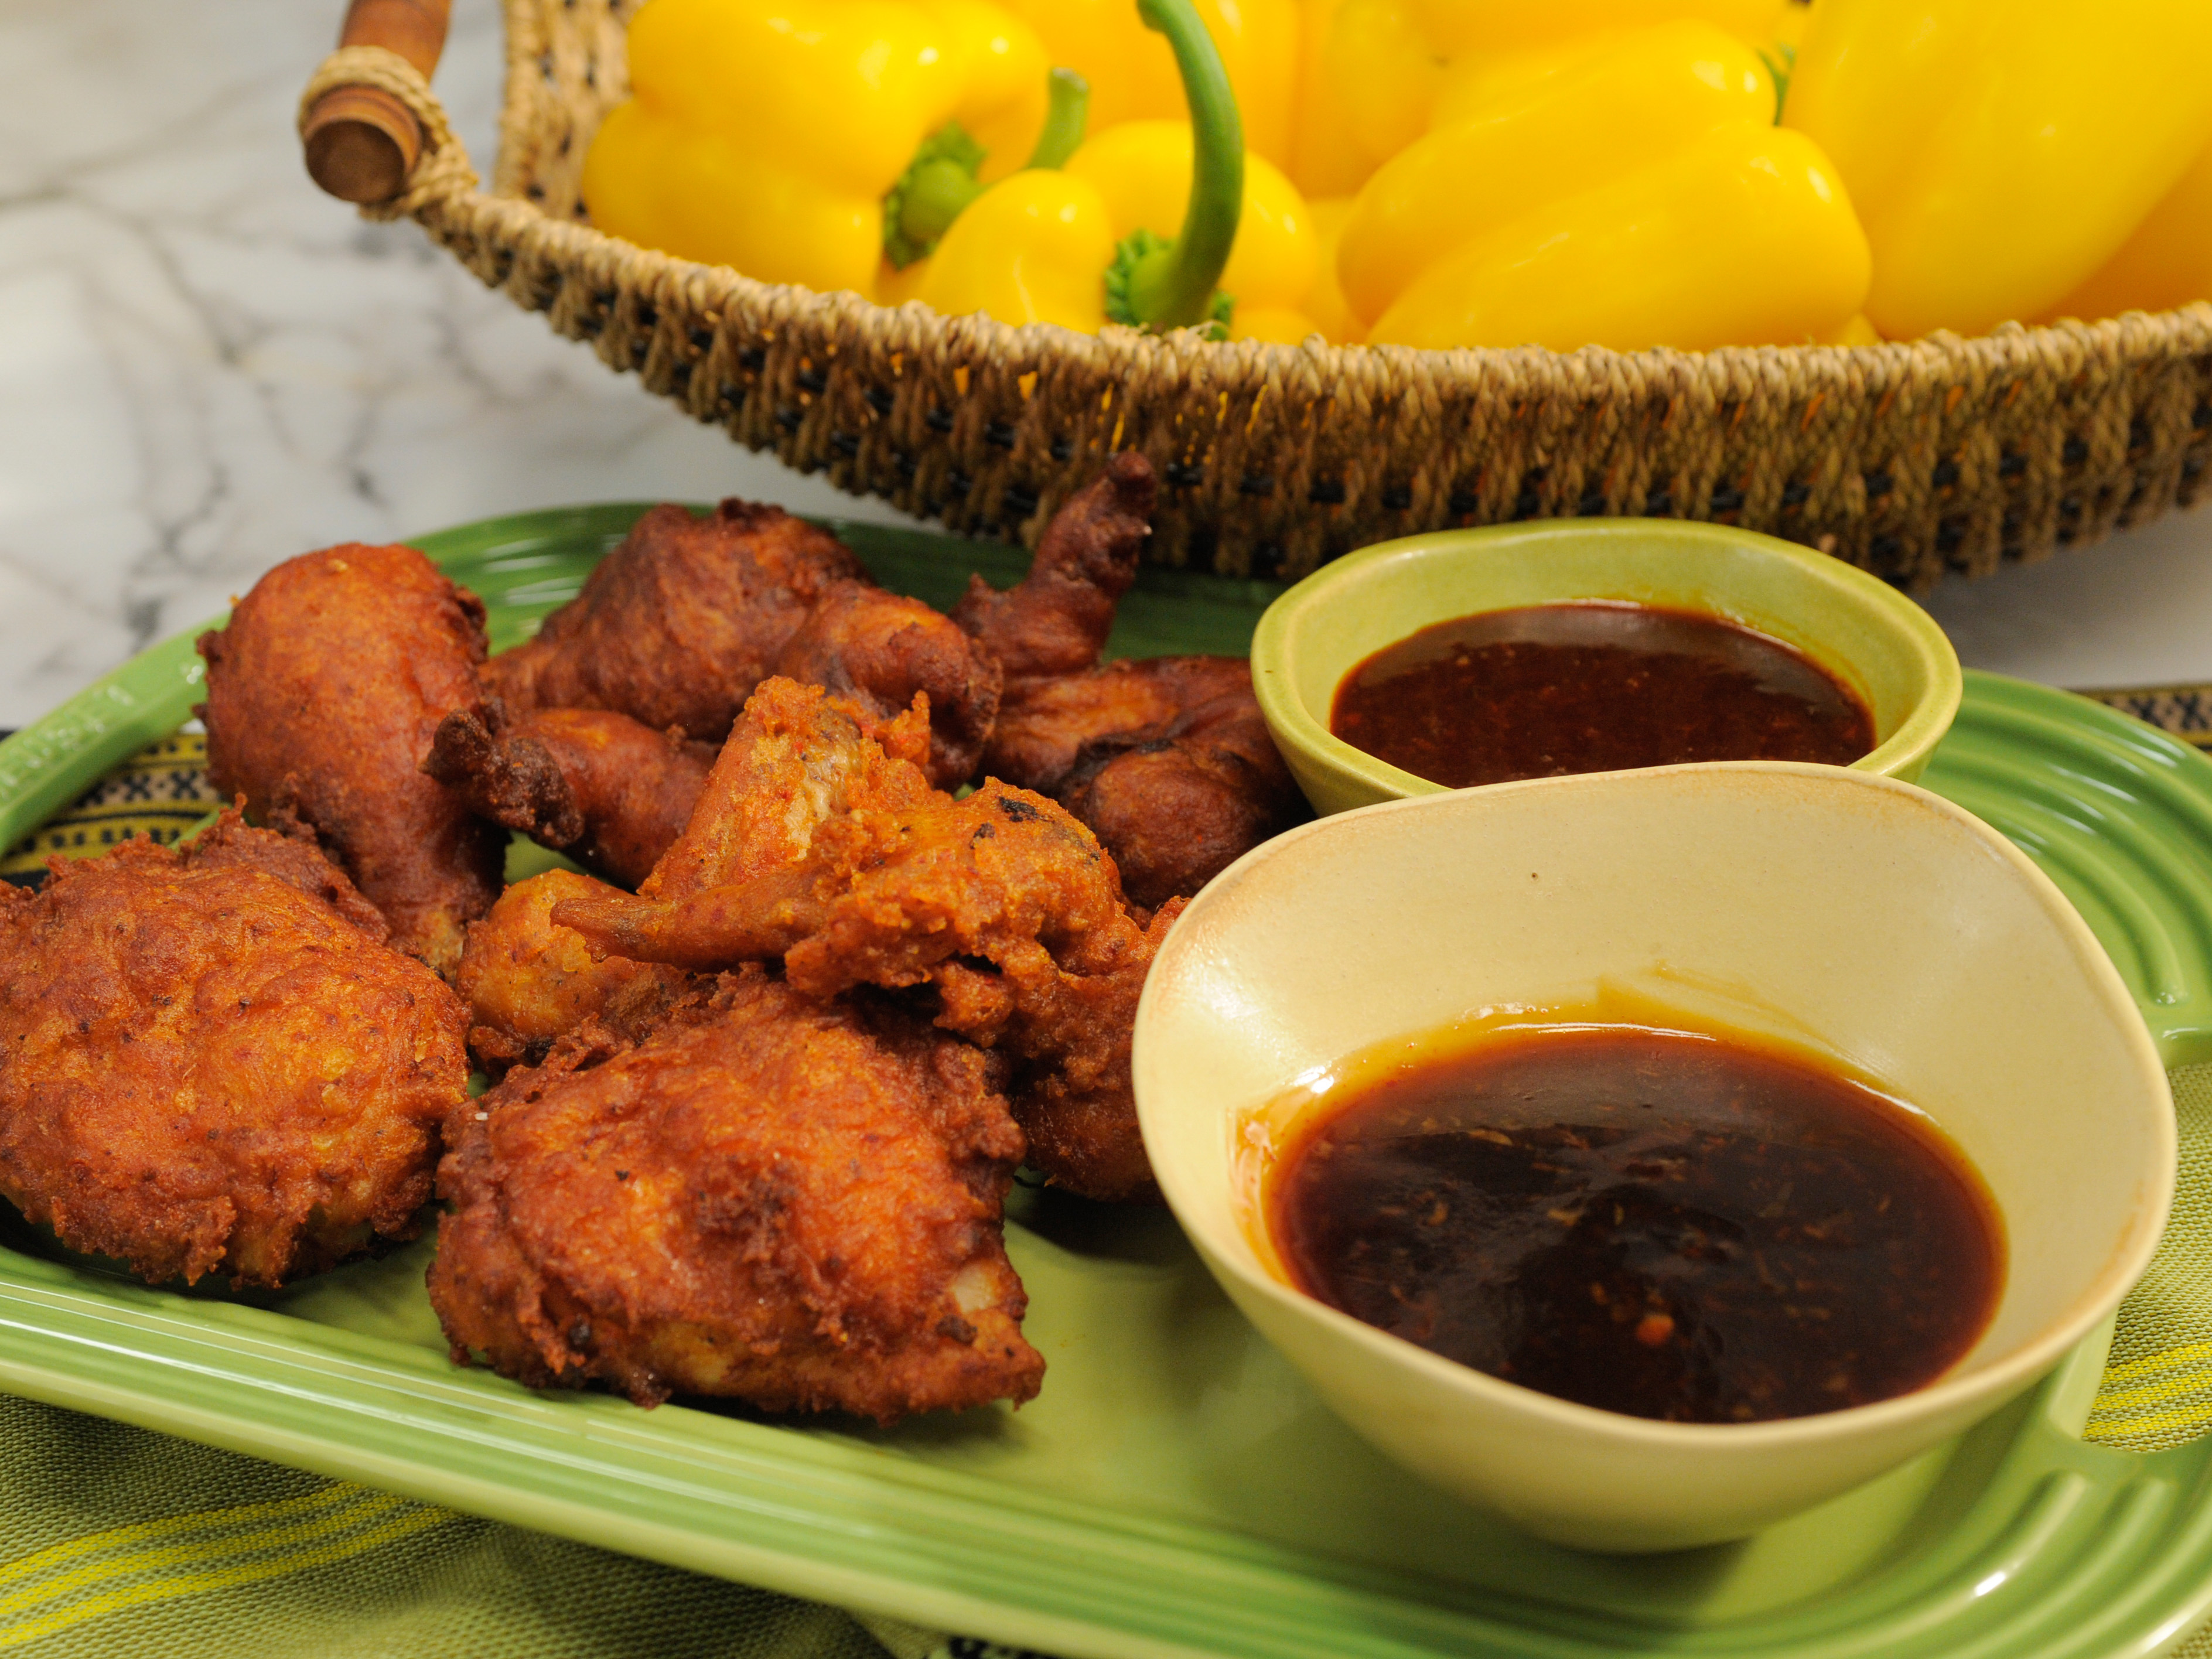 Korean Fried Chicken Mix (with Basic Ingredients) - That Cute Dish!